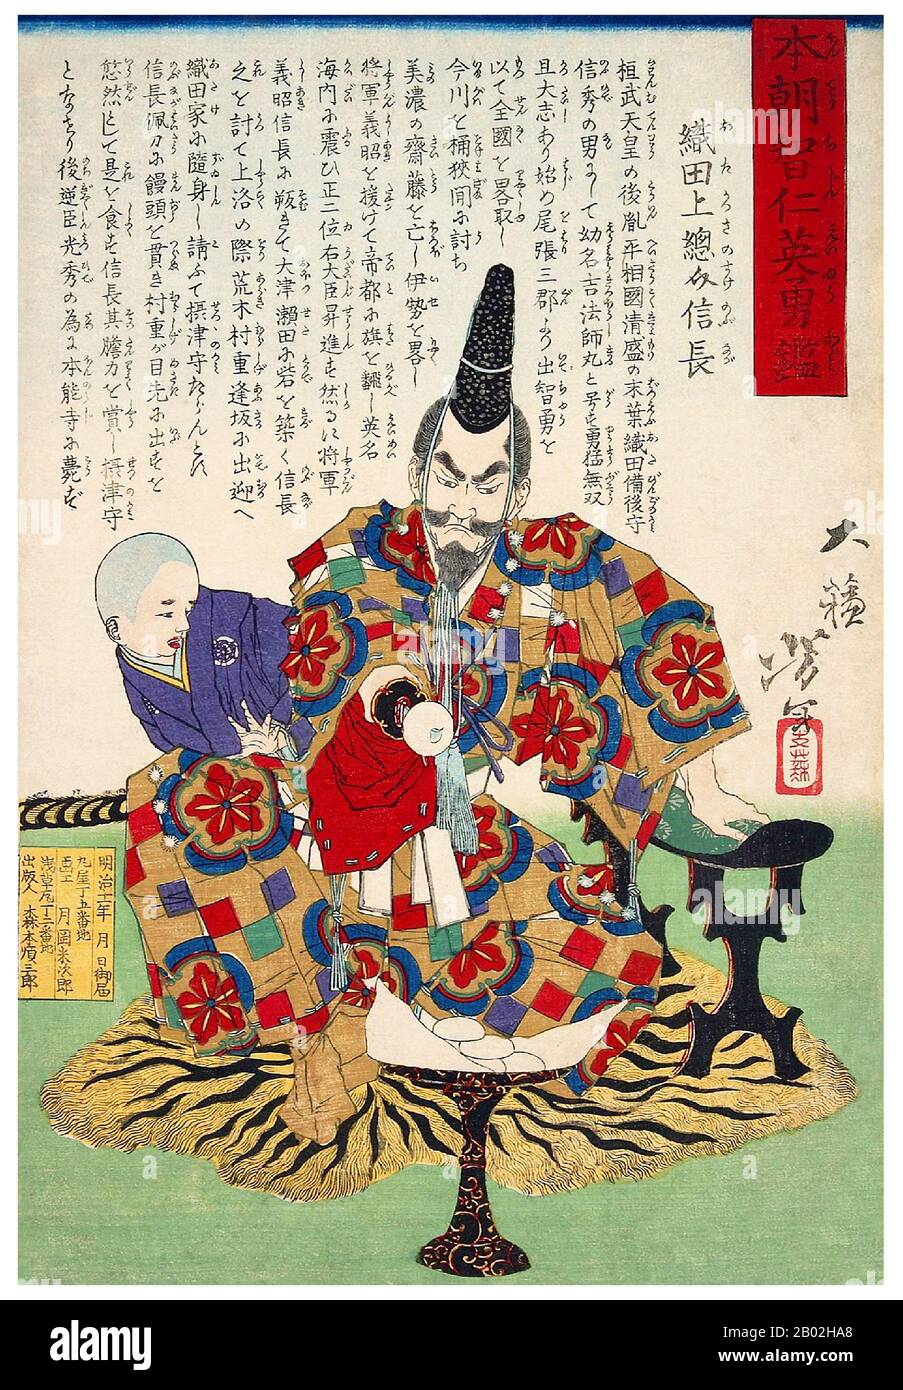 Oda Nobunaga (June 23, 1534 – June 21, 1582) was the initiator of the unification of Japan under the rule of the shogun in the late 16th century, a rule that ended only with the opening of Japan to the Western world in 1868. He was also a major daimyo during the Sengoku period of Japanese history. His work was continued, completed and finalized by his successors Toyotomi Hideyoshi and Tokugawa Ieyasu. He was the second son of Oda Nobuhide, a deputy shugo (military governor) with land holdings in Owari Province.  Nobunaga lived a life of continuous military conquest, eventually conquering a thi Stock Photo